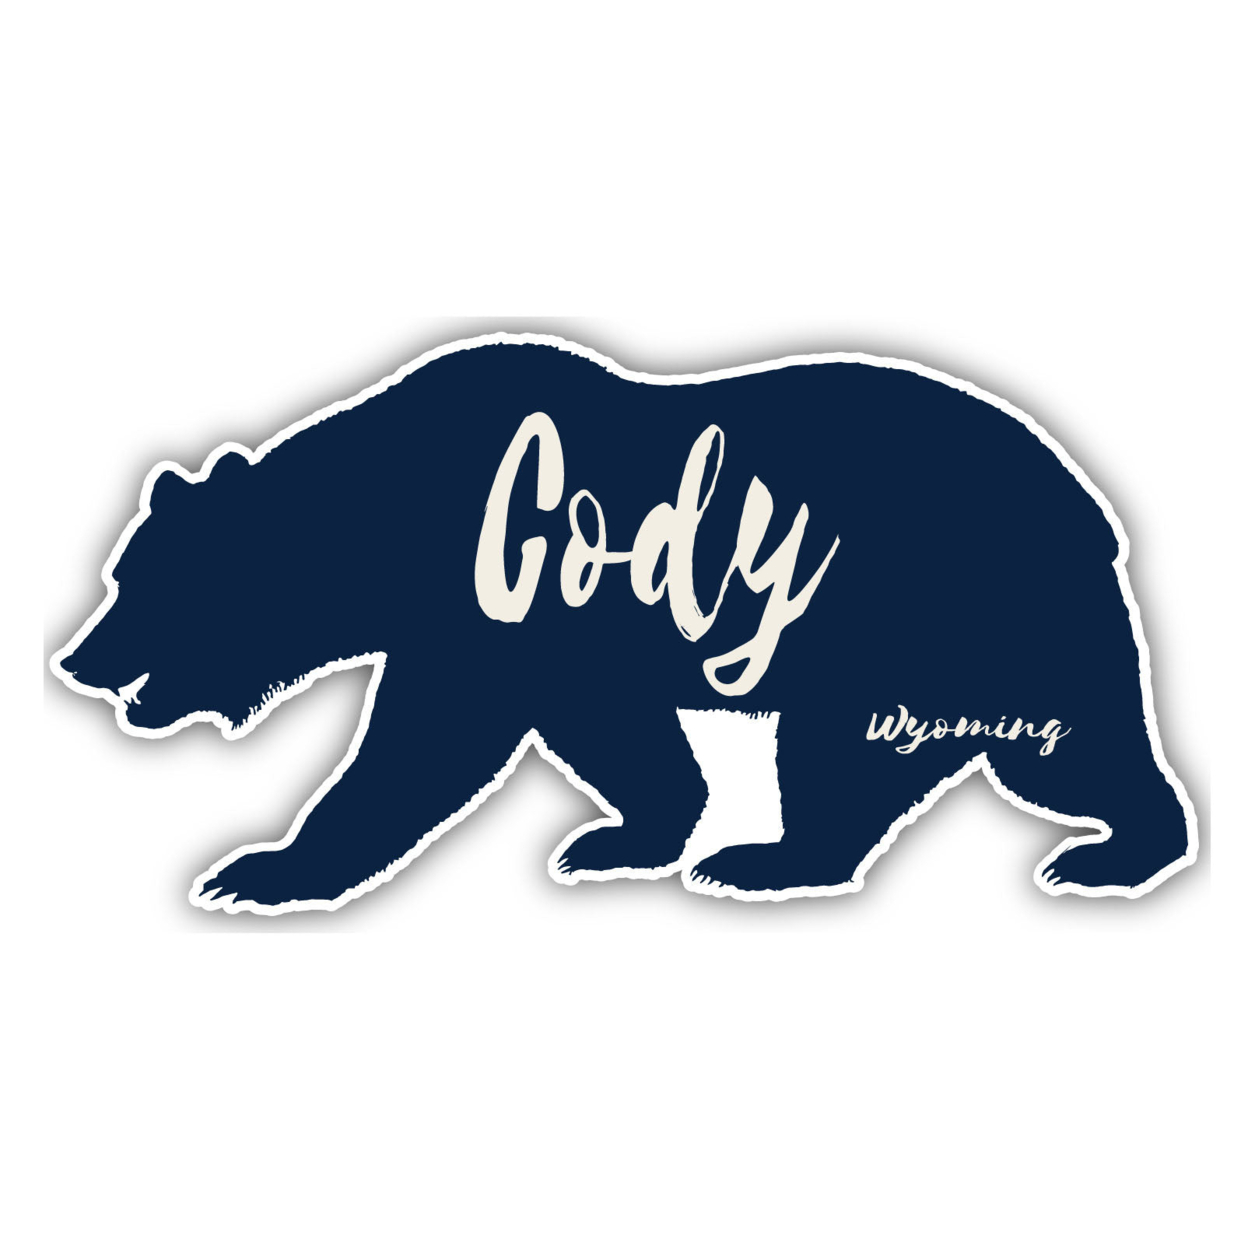 Cody Wyoming Souvenir Decorative Stickers (Choose Theme And Size) - 4-Pack, 8-Inch, Bear